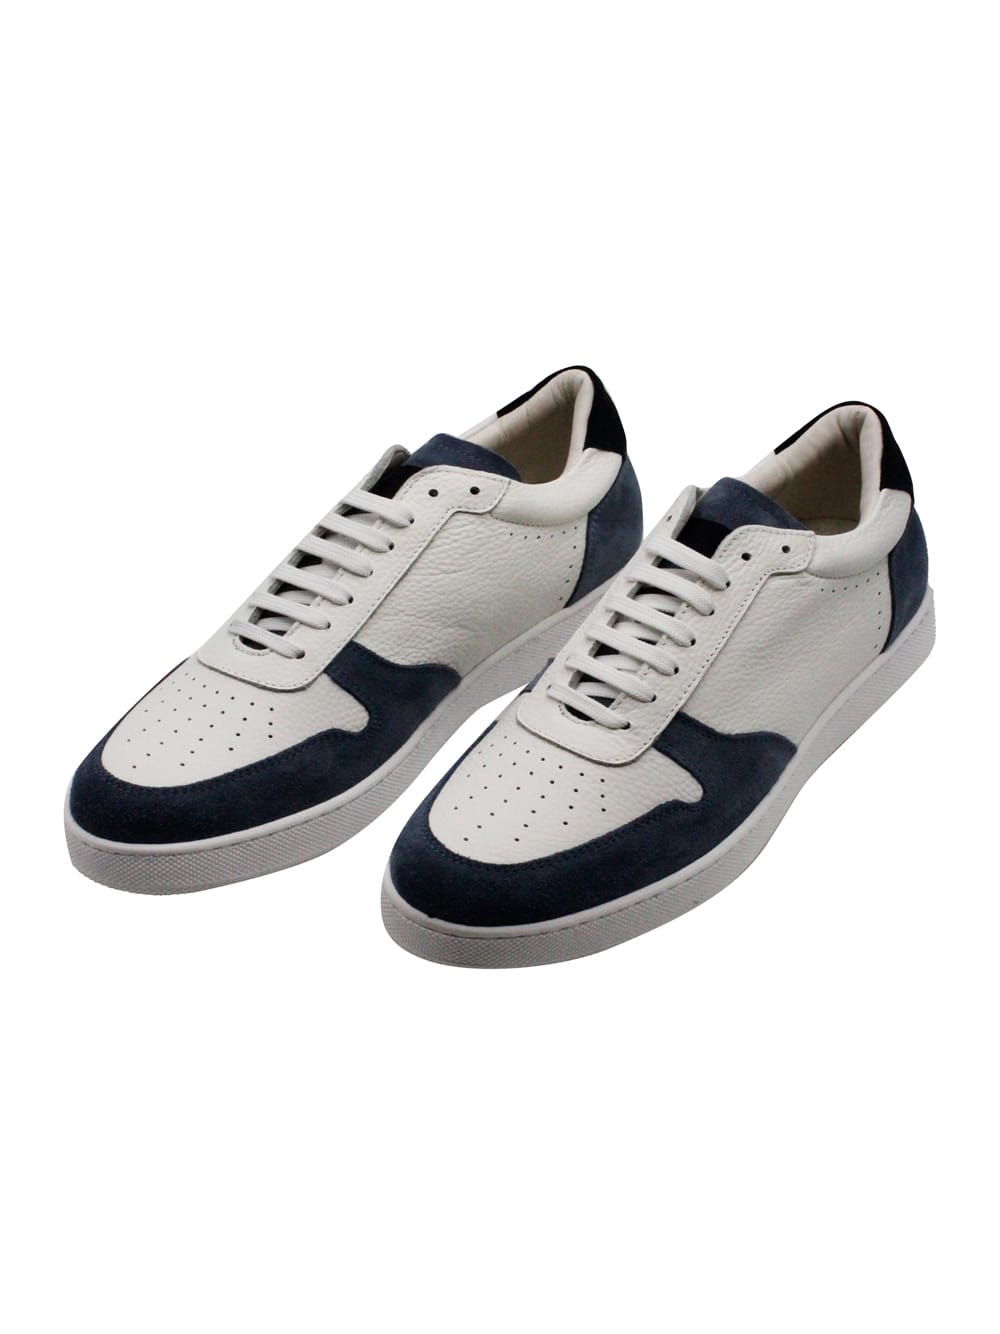 Sneakers In Soft And Fine Leather With Contrasting Color Suede Details With Lace Closure And Suede Back